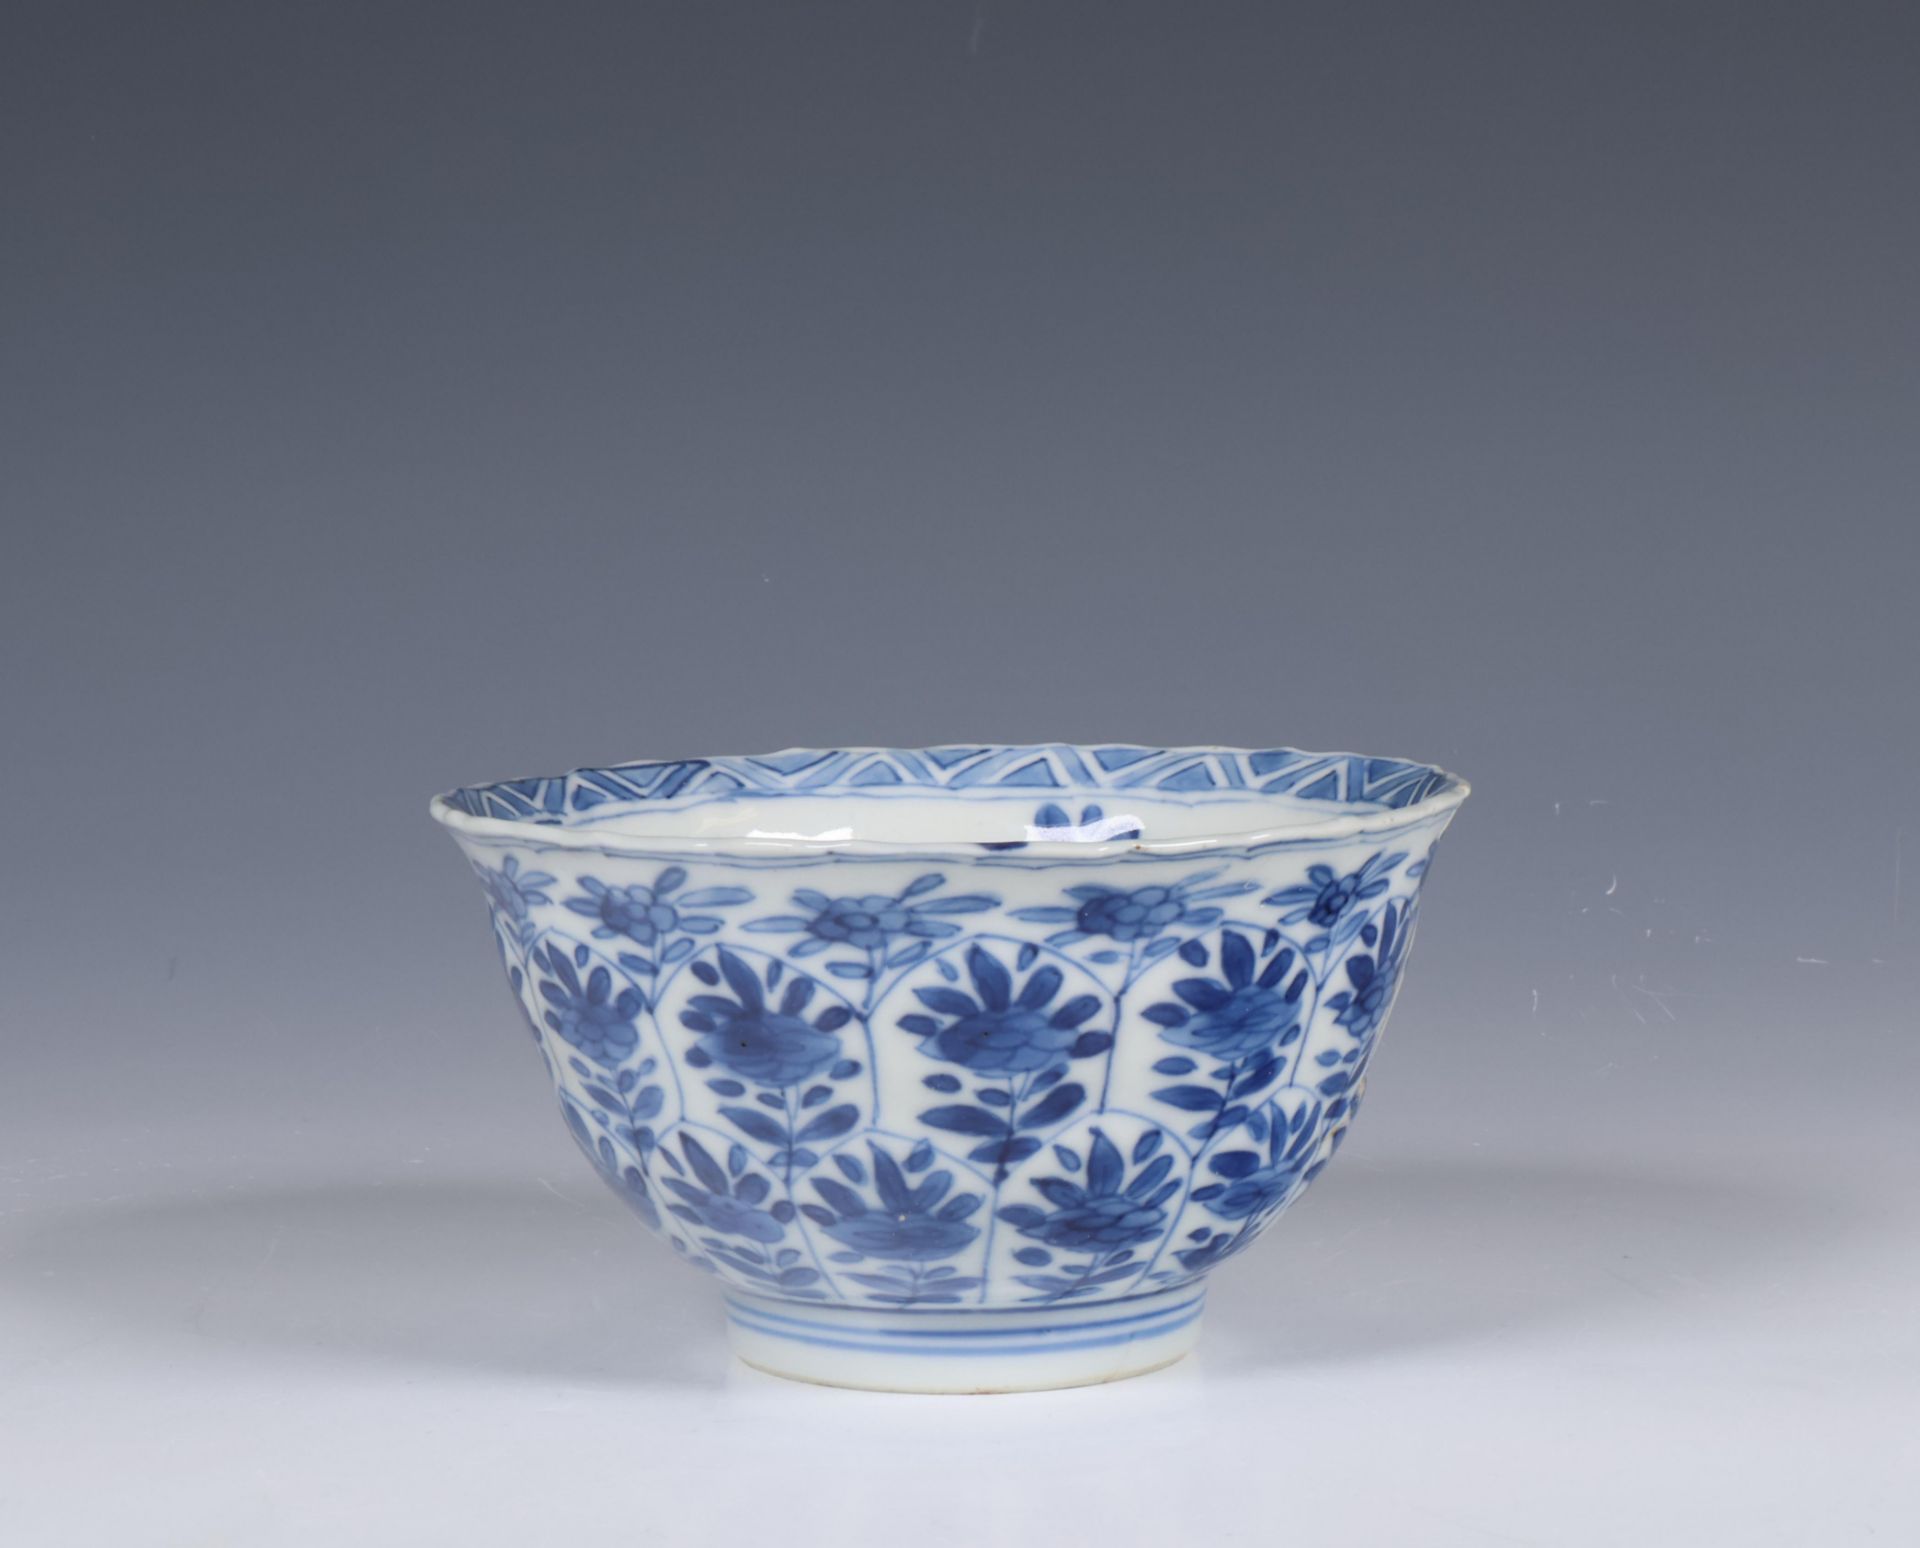 China, blue and white porcelain floral bowl, Kangxi period (1662-1722), - Image 2 of 5